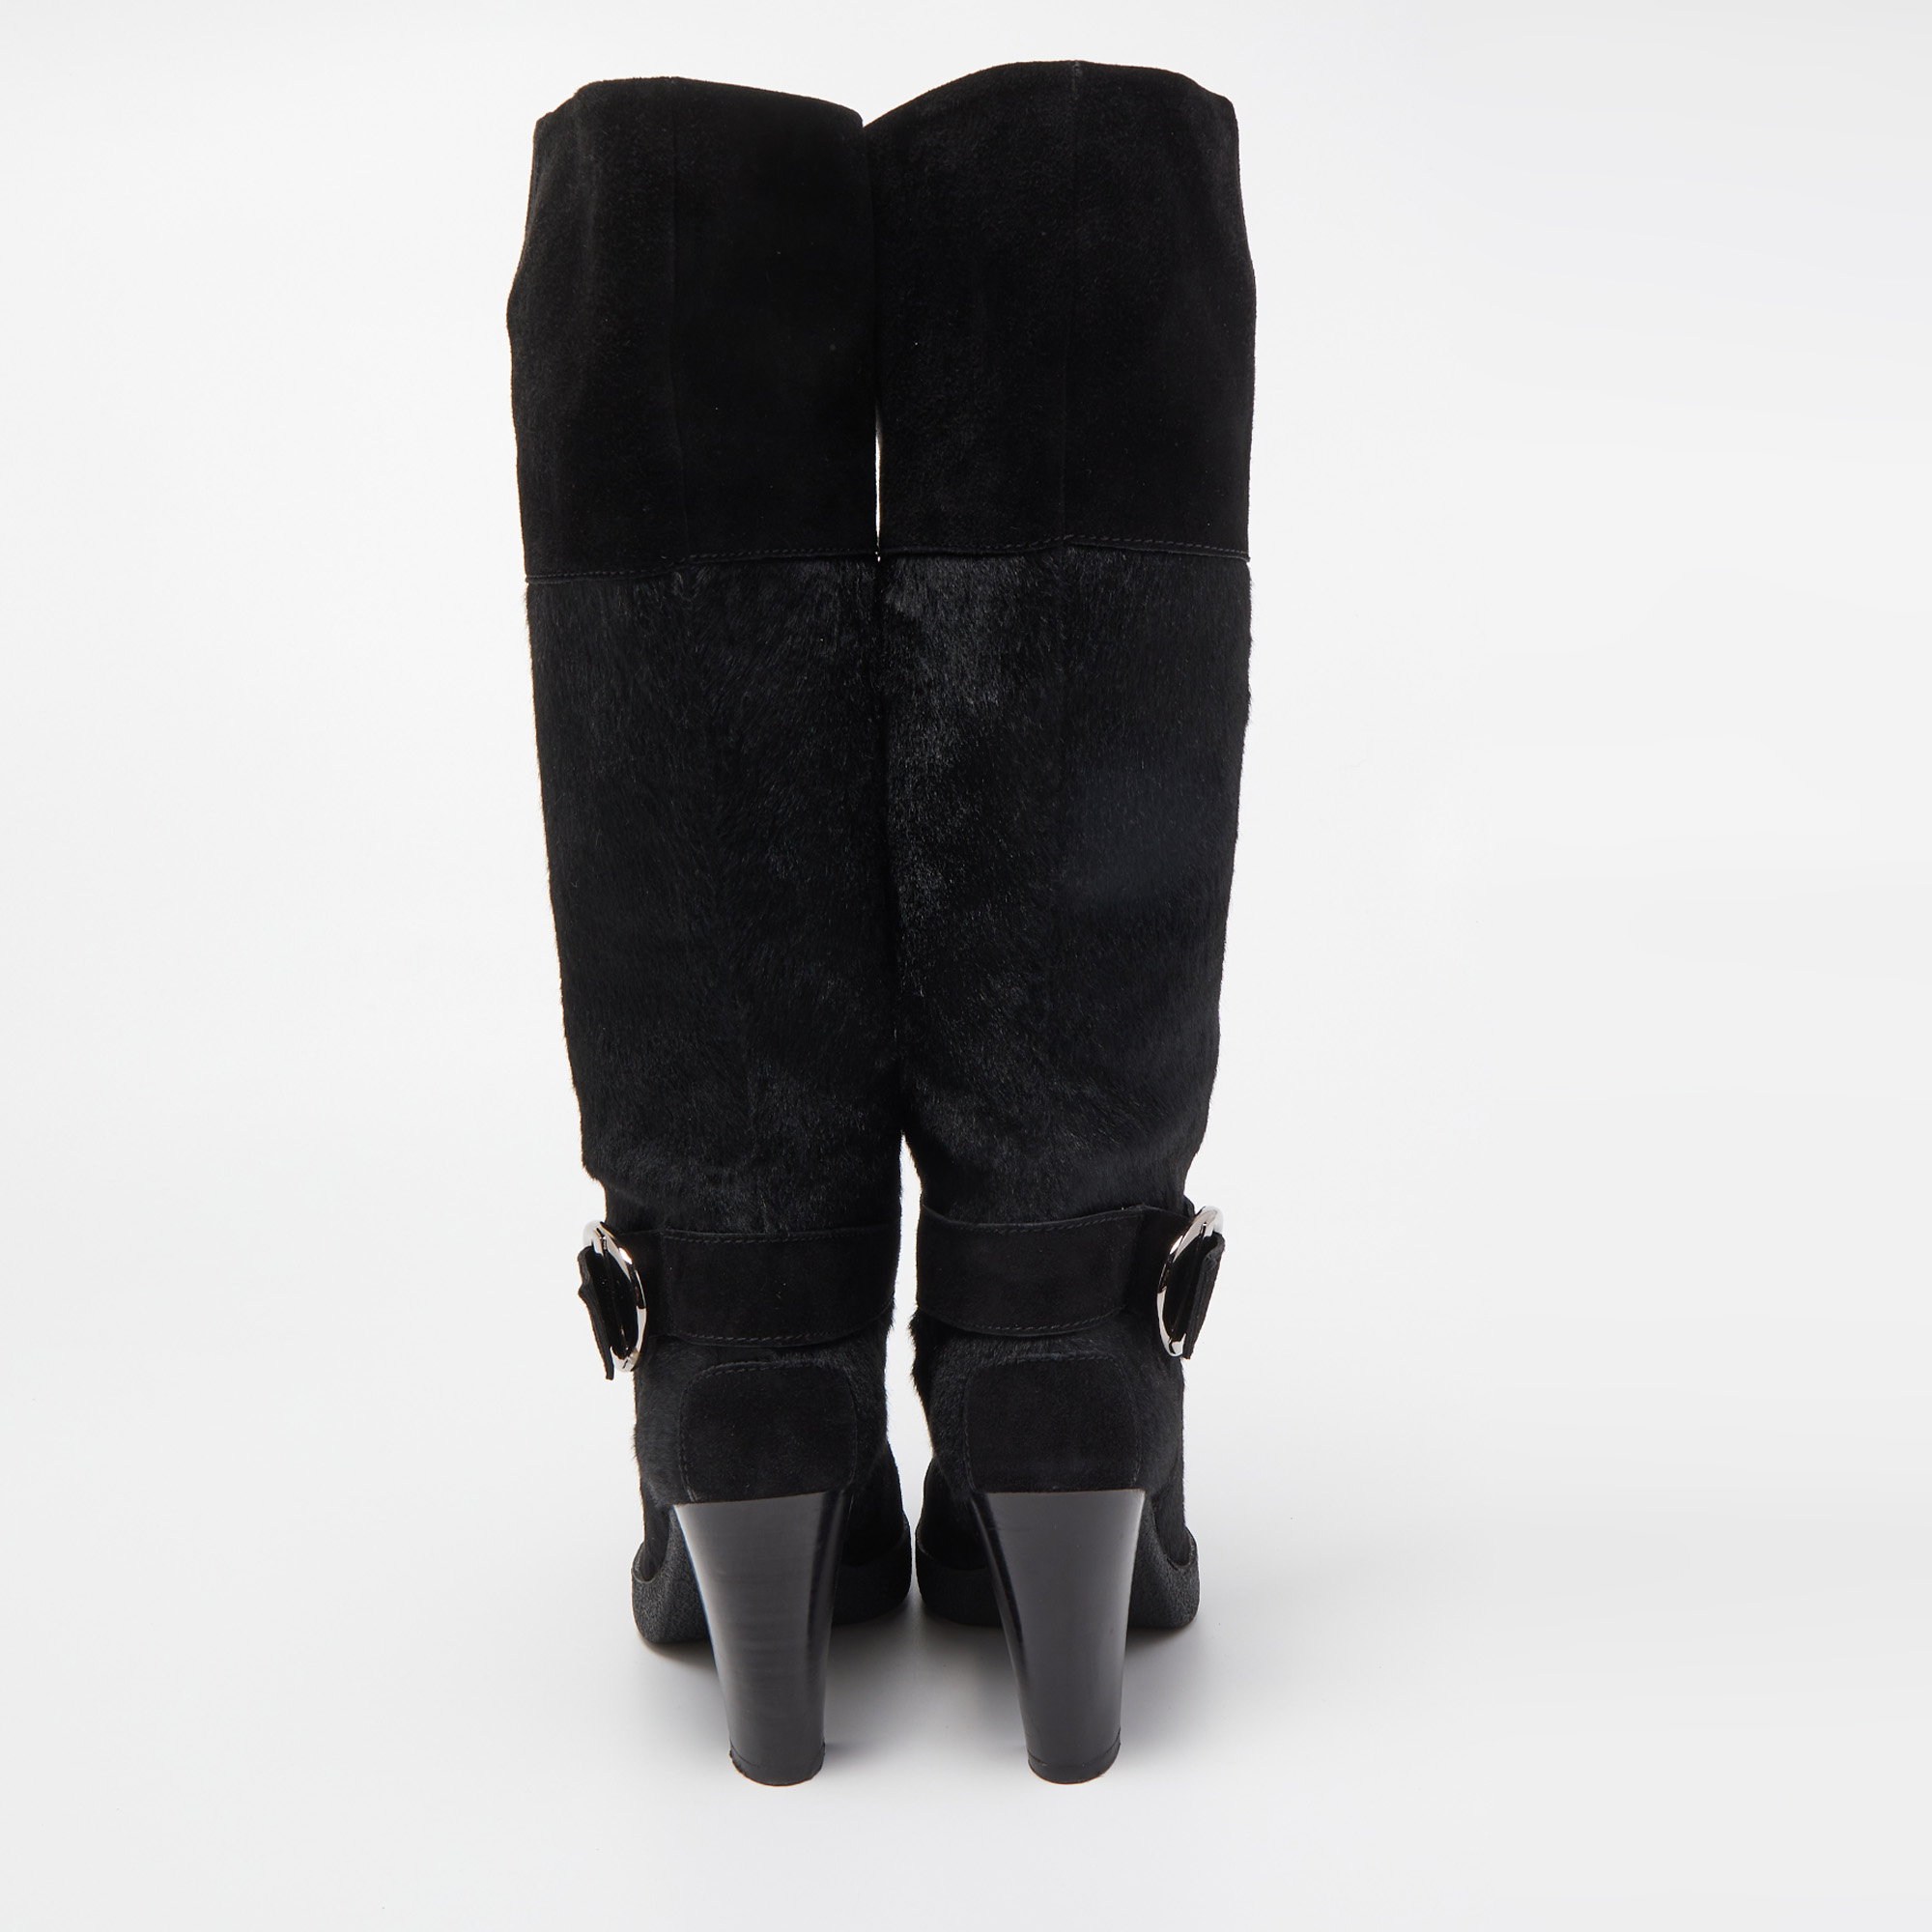 Tod's Black Suede And Calf Hair Knee High Boots Size 40